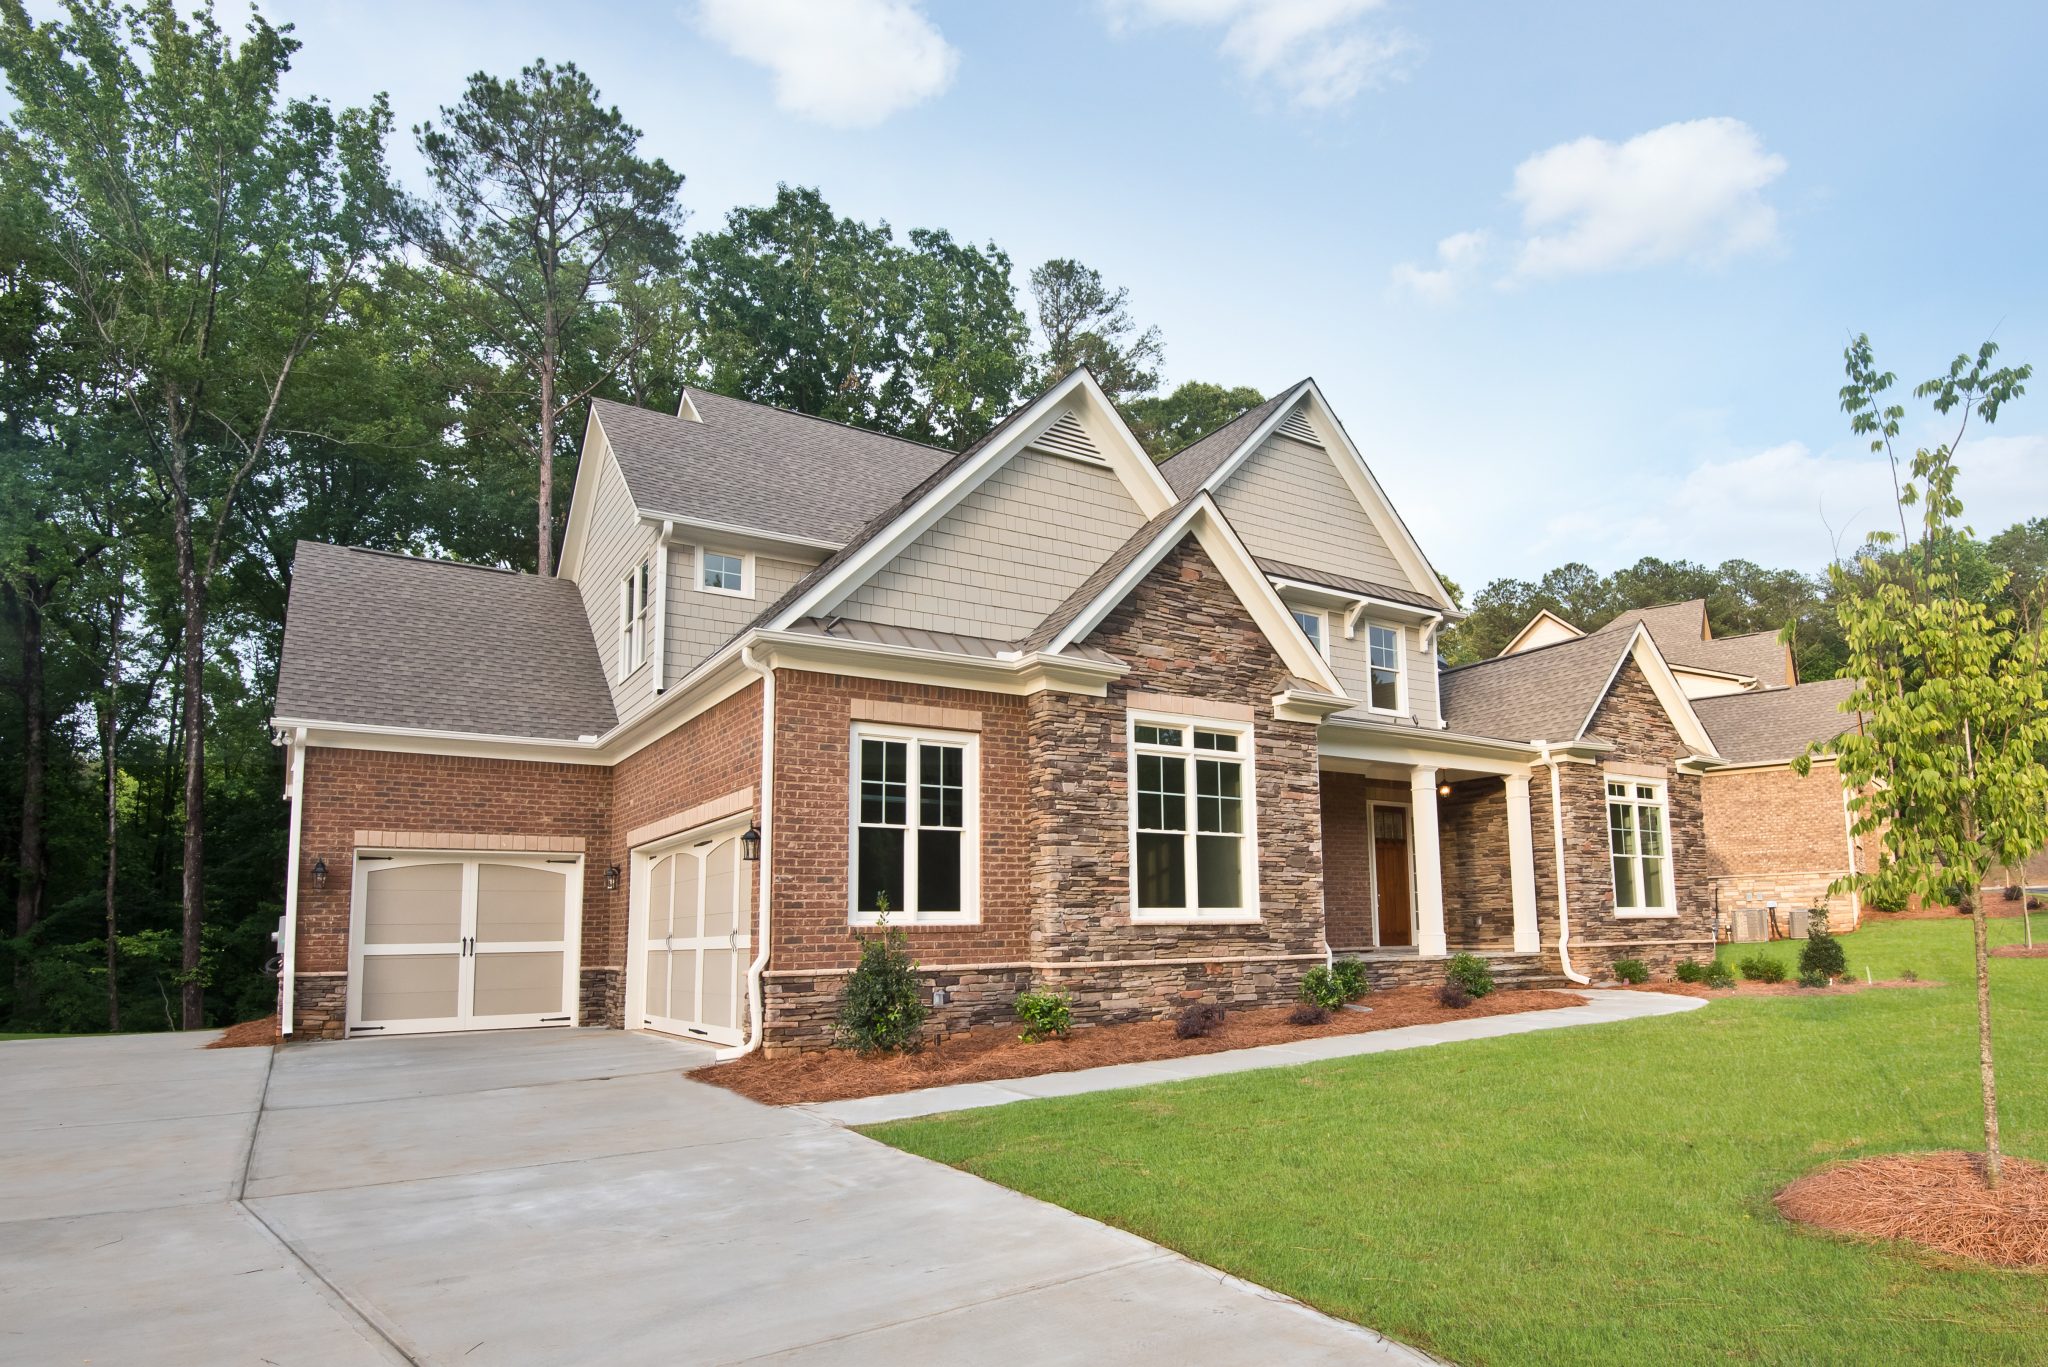 A new home in Heritage at Kennesaw Mountain